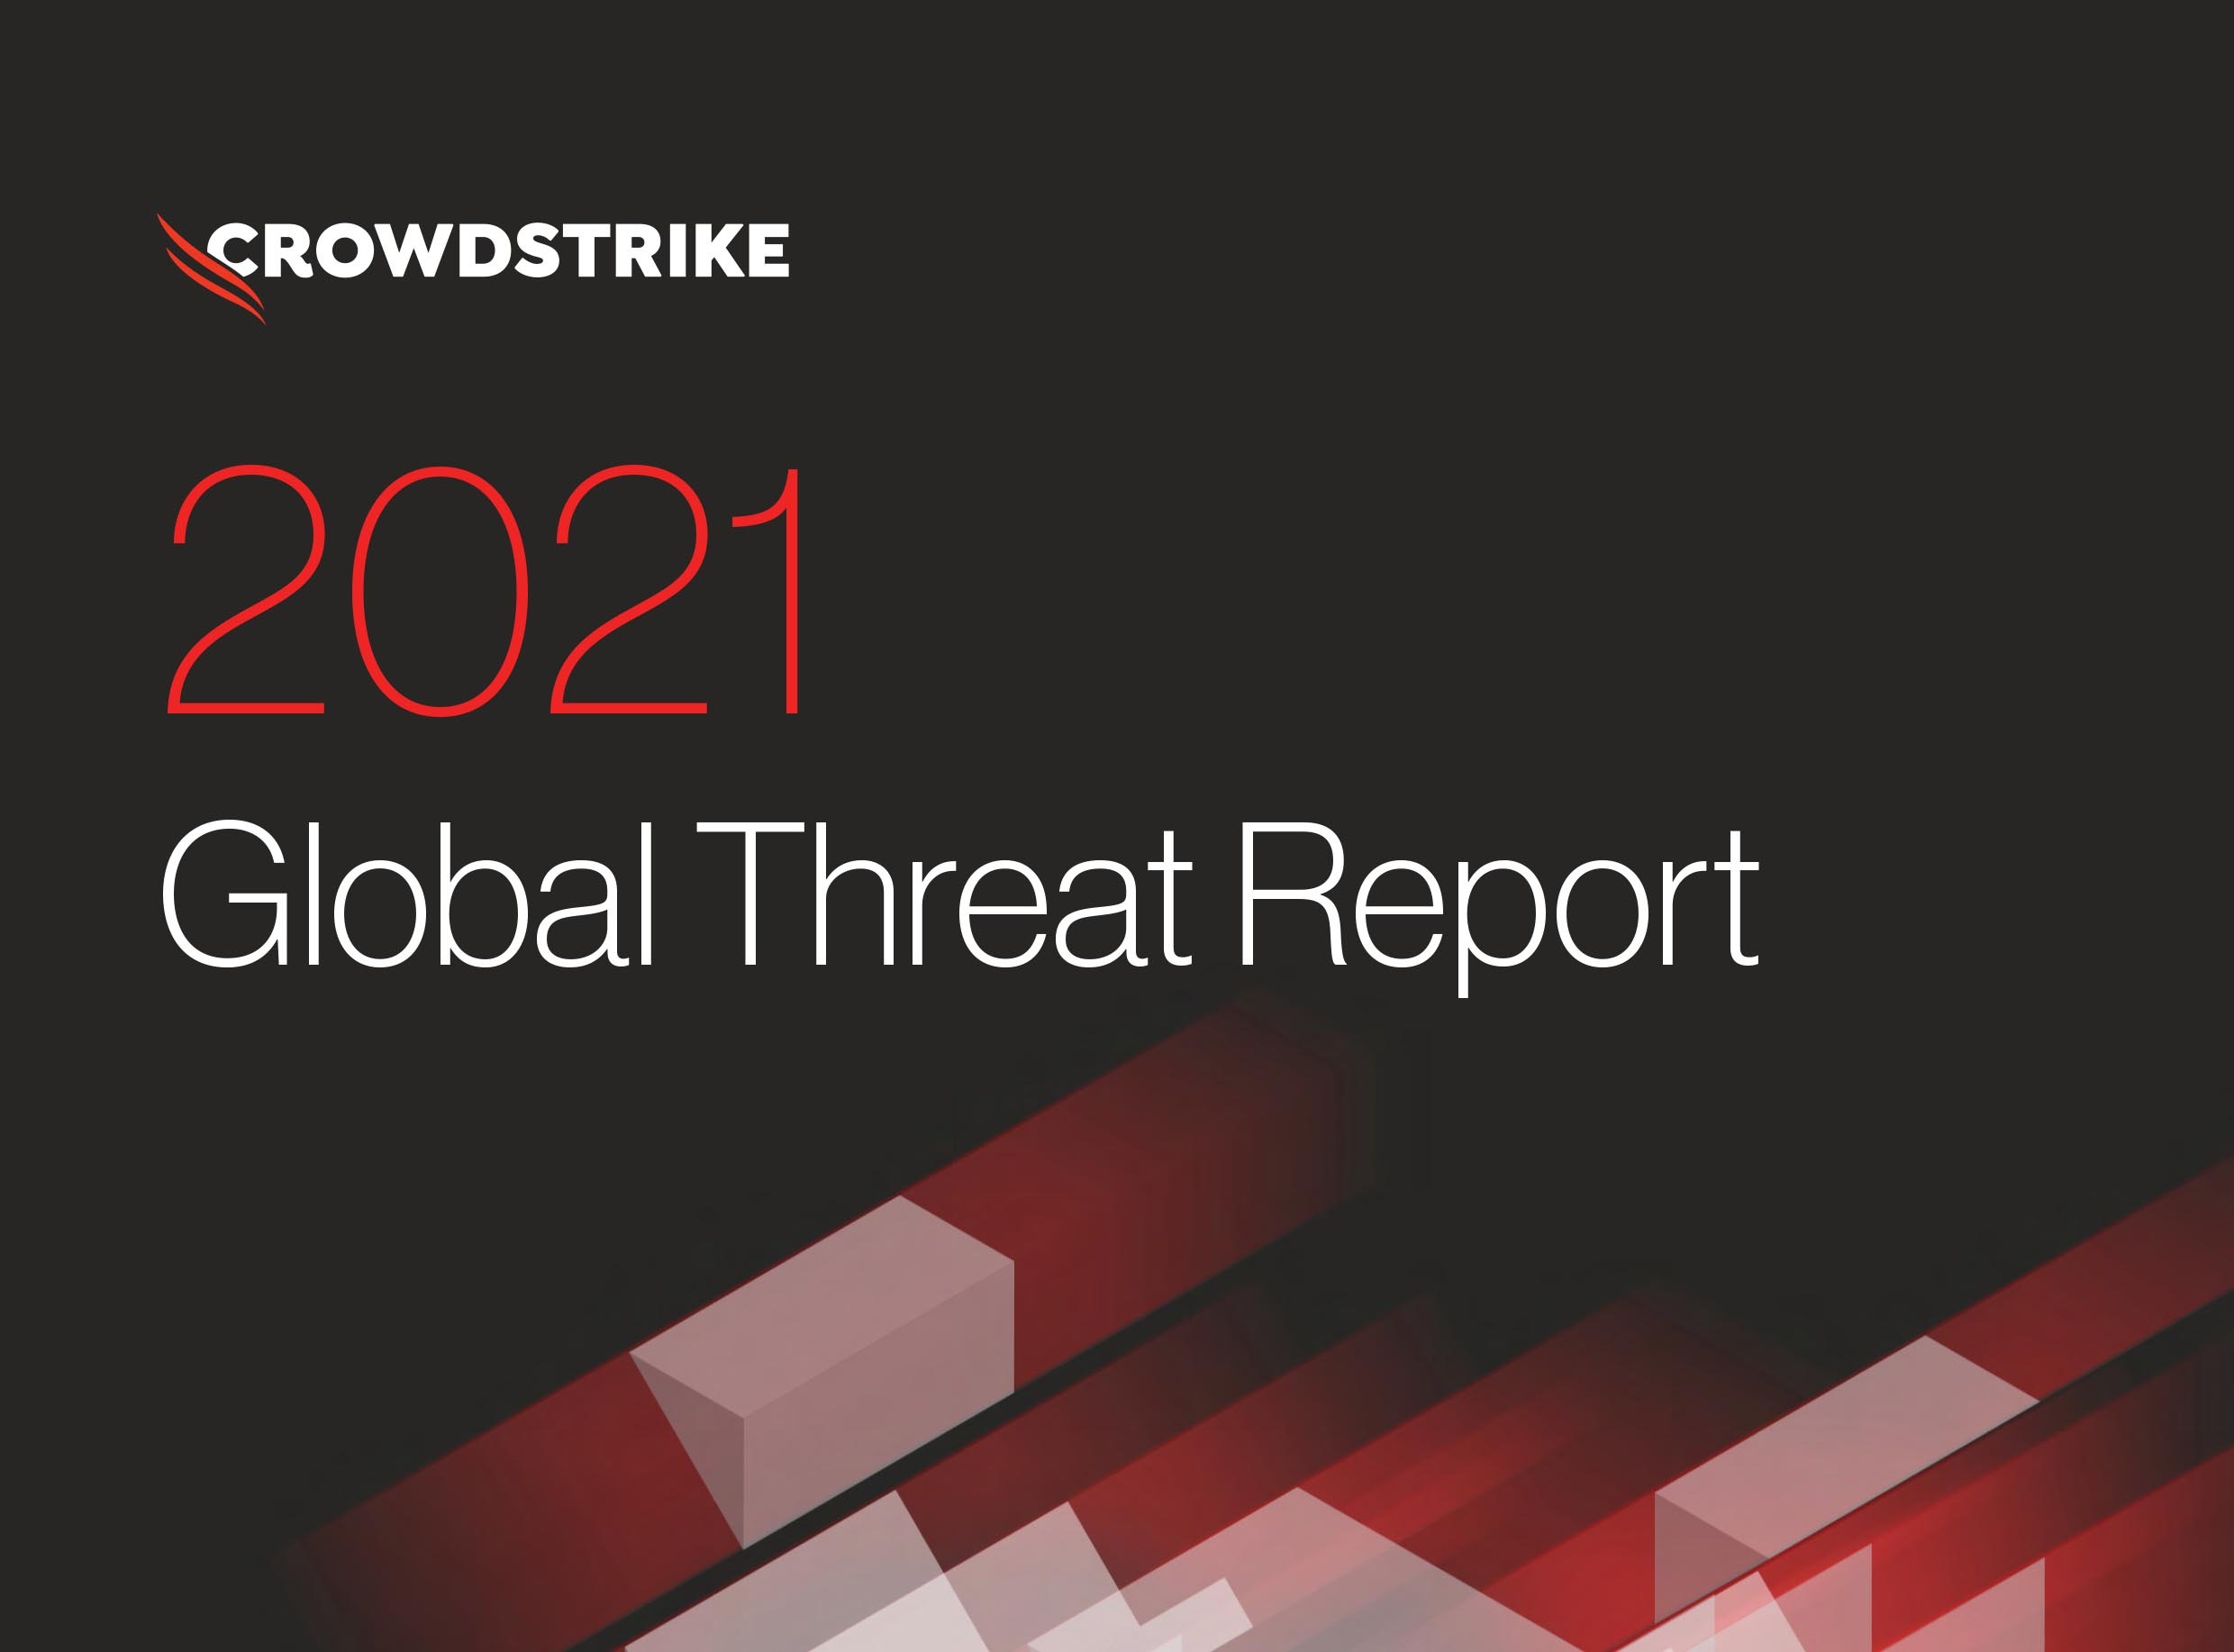 CrowdStrike Global Threat Report Highlights Key Trends in eCrime and